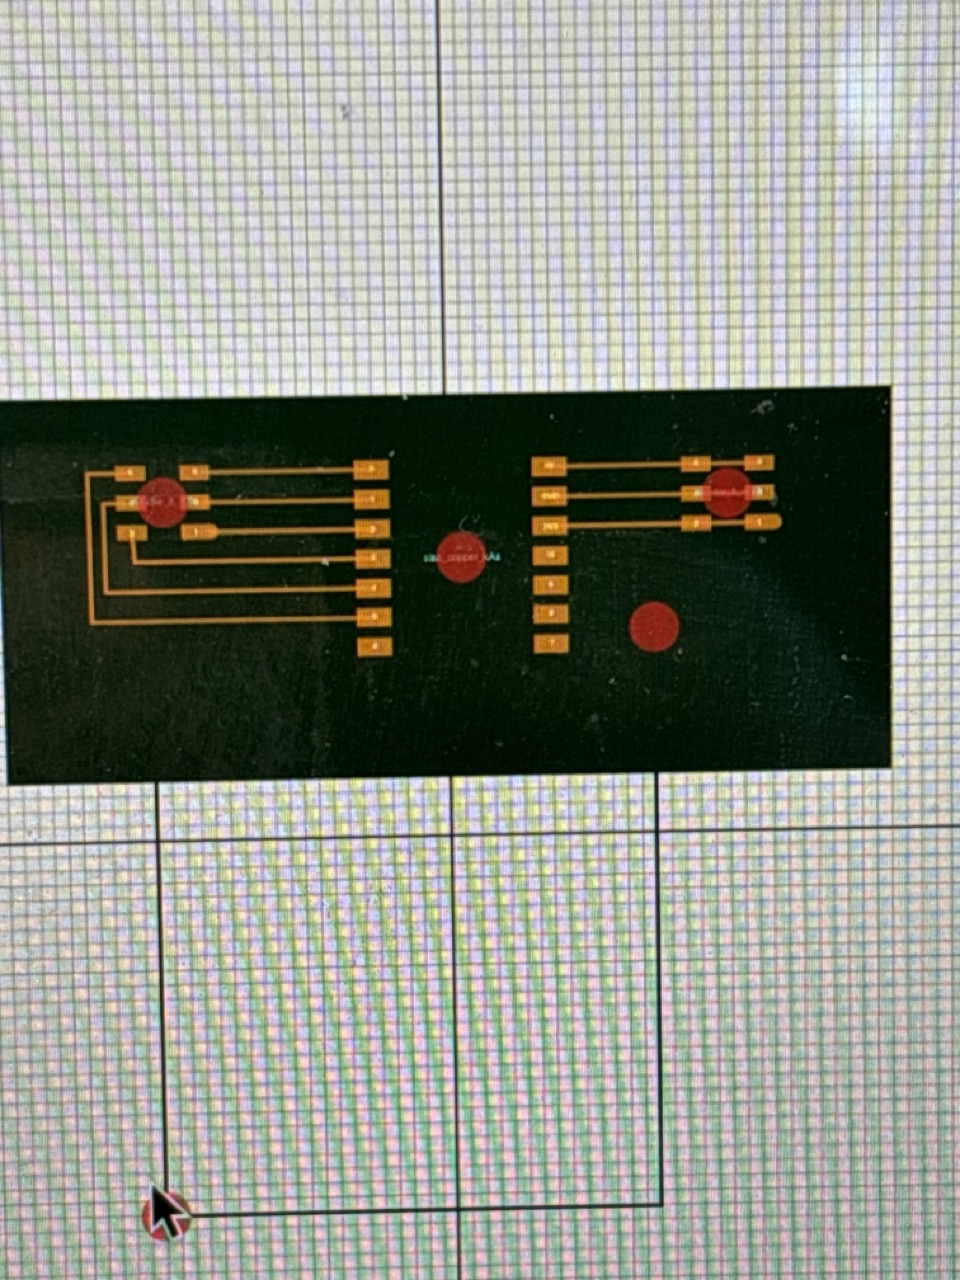 Another Design in SVG-PCB